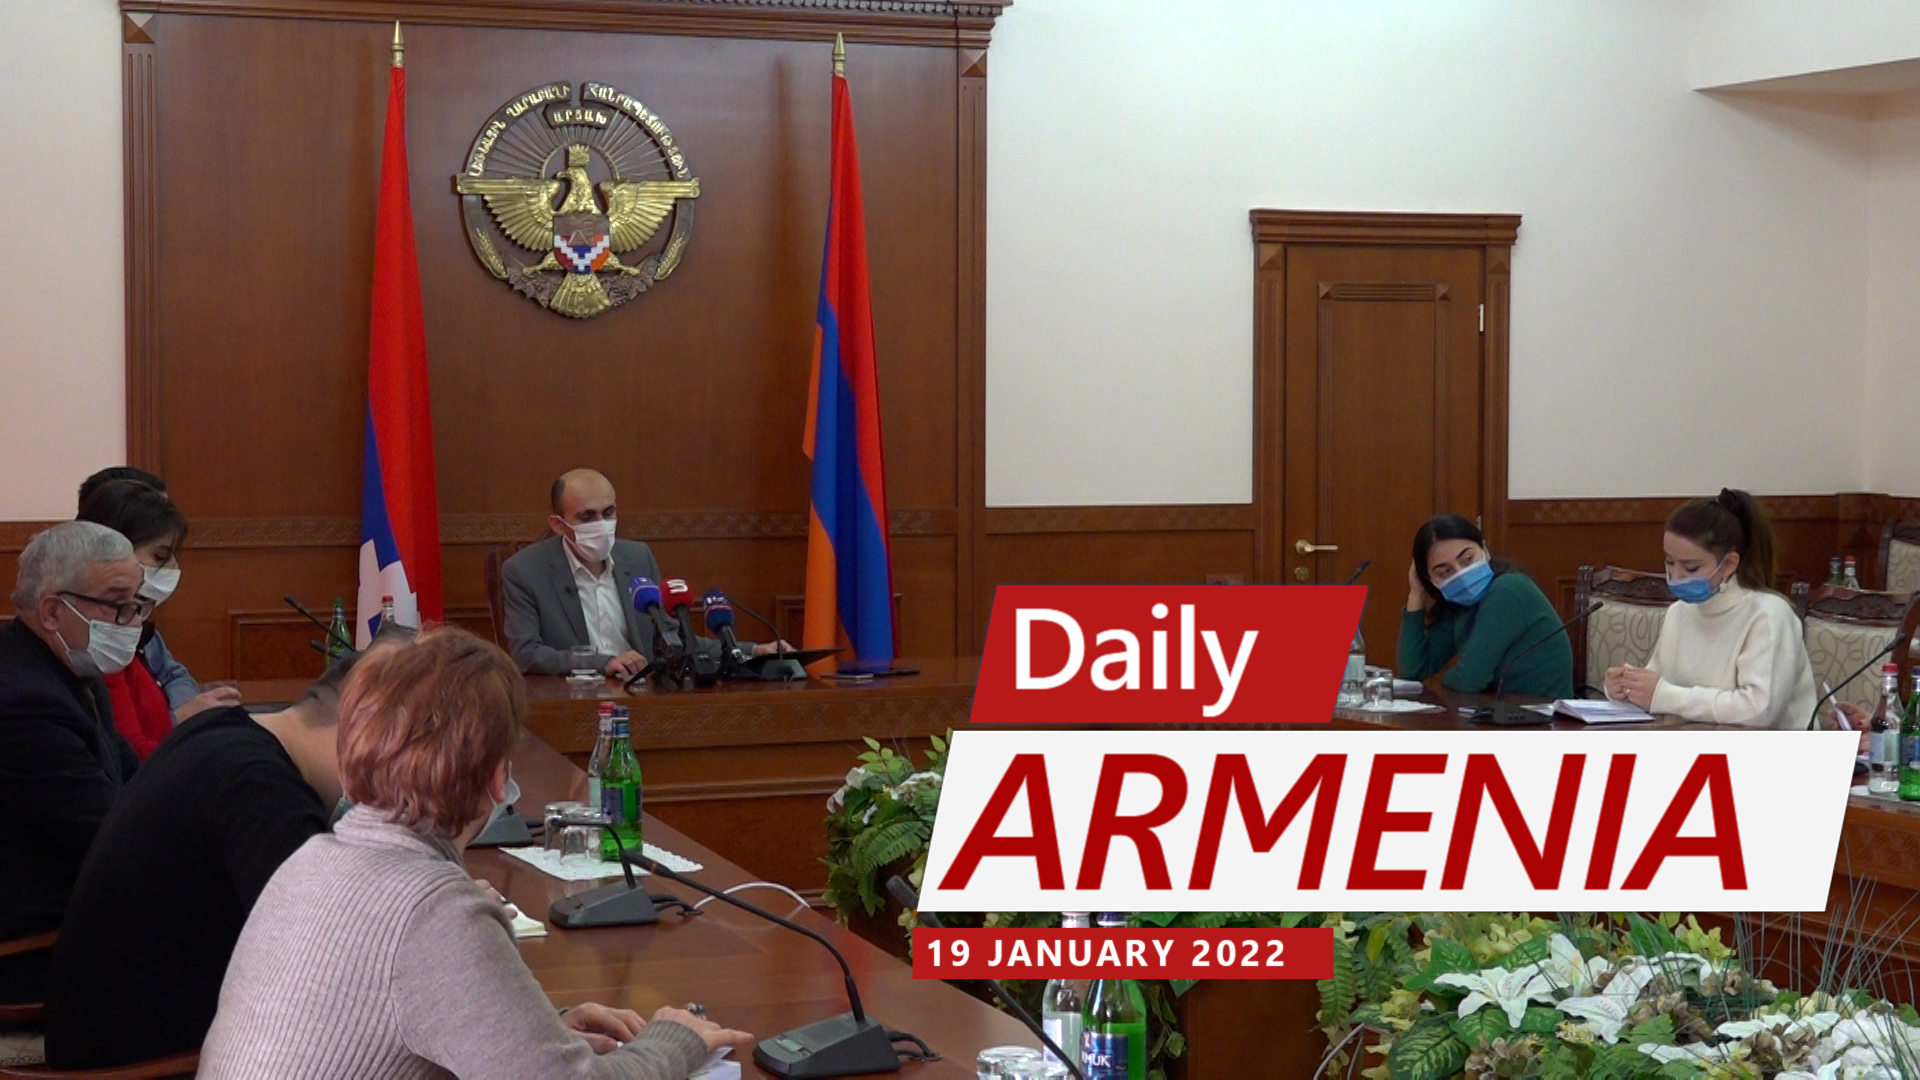 Financial aid for refugees, free healthcare, and constitutional changes on the agenda in Karabakh